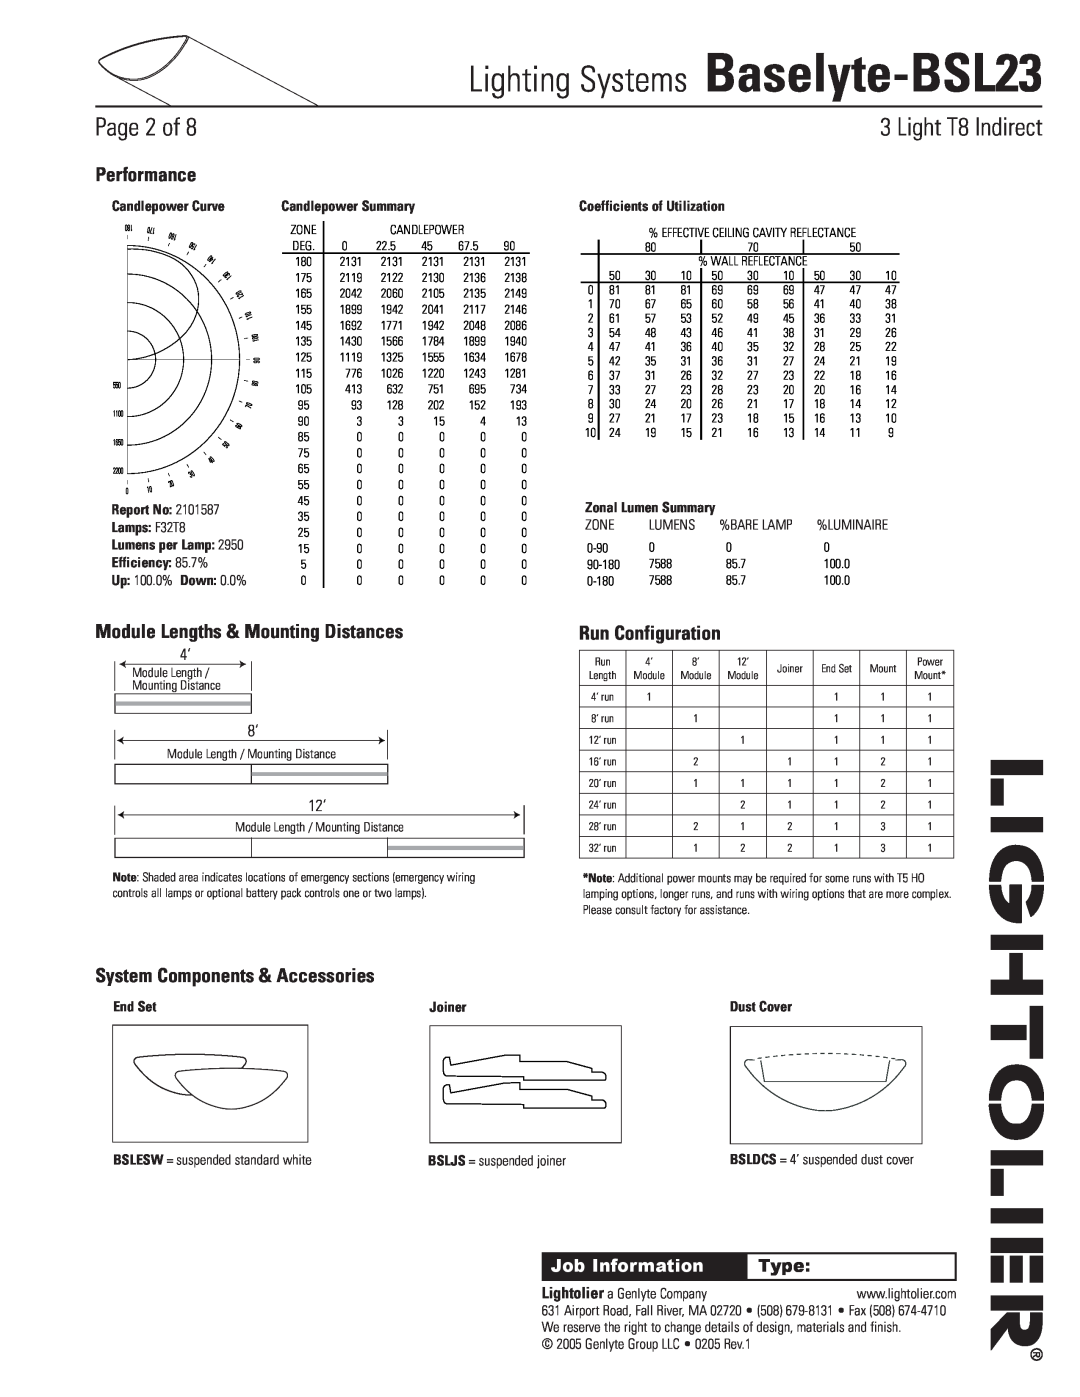 Lightolier Lighting Systems Baselyte-BSL23, Performance, Module Lengths & Mounting Distances, Run Configuration, Type 